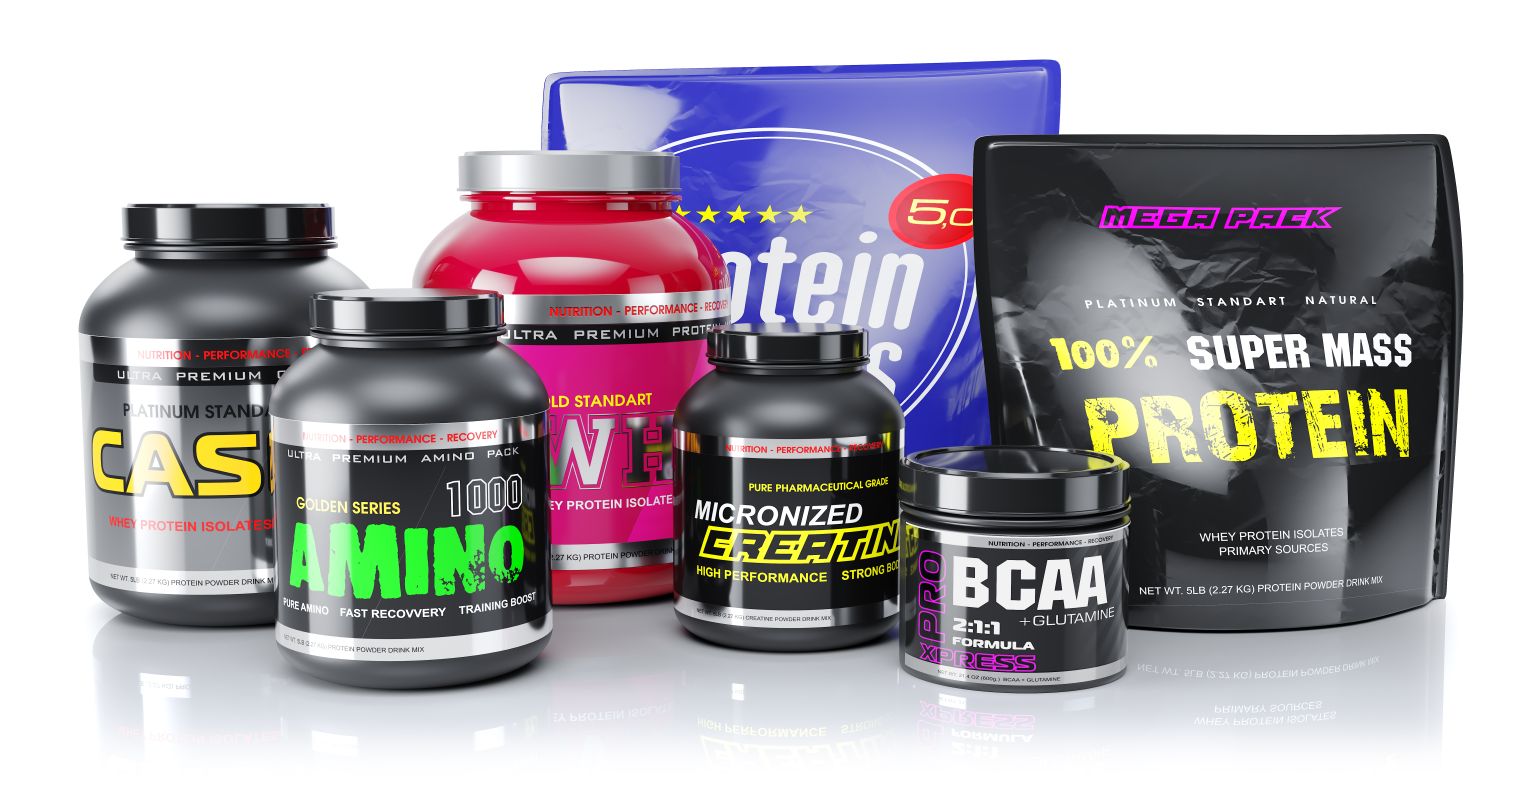 Ensuring legal ingredients in sports supplements